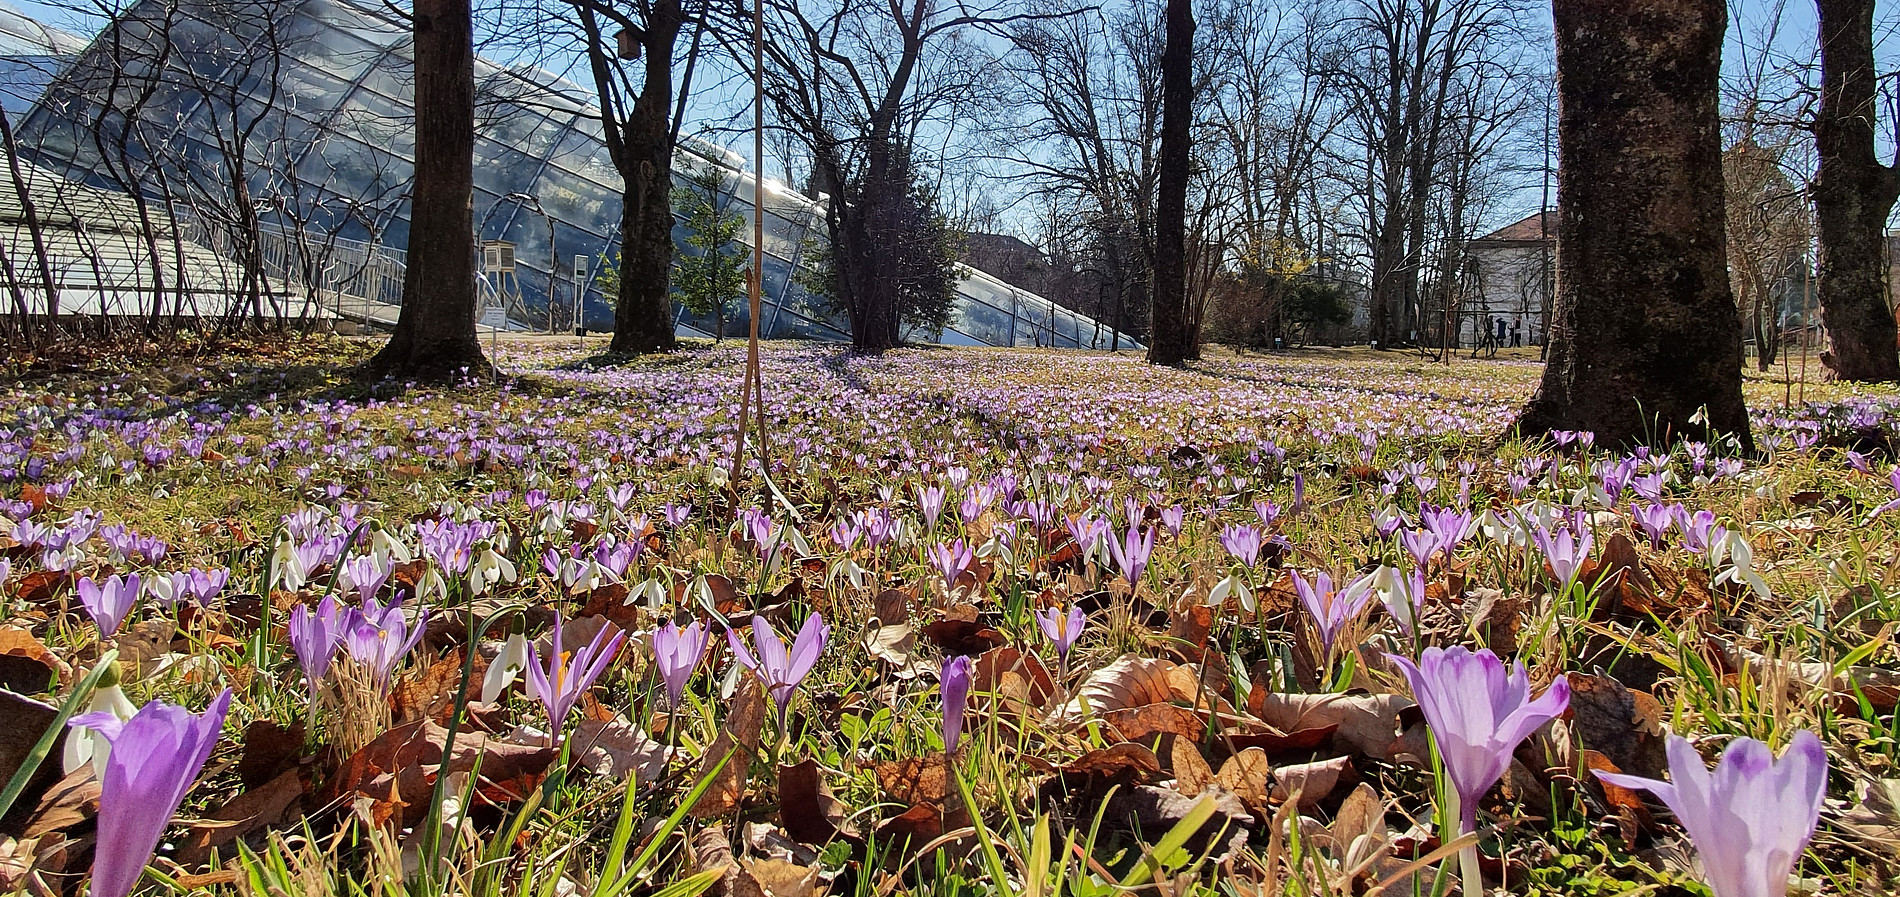 Many crocuses are blooming in a meadow. The greenhouse of the botanical garden can be seen in the background. ©Uni Graz/Ulrike Grube